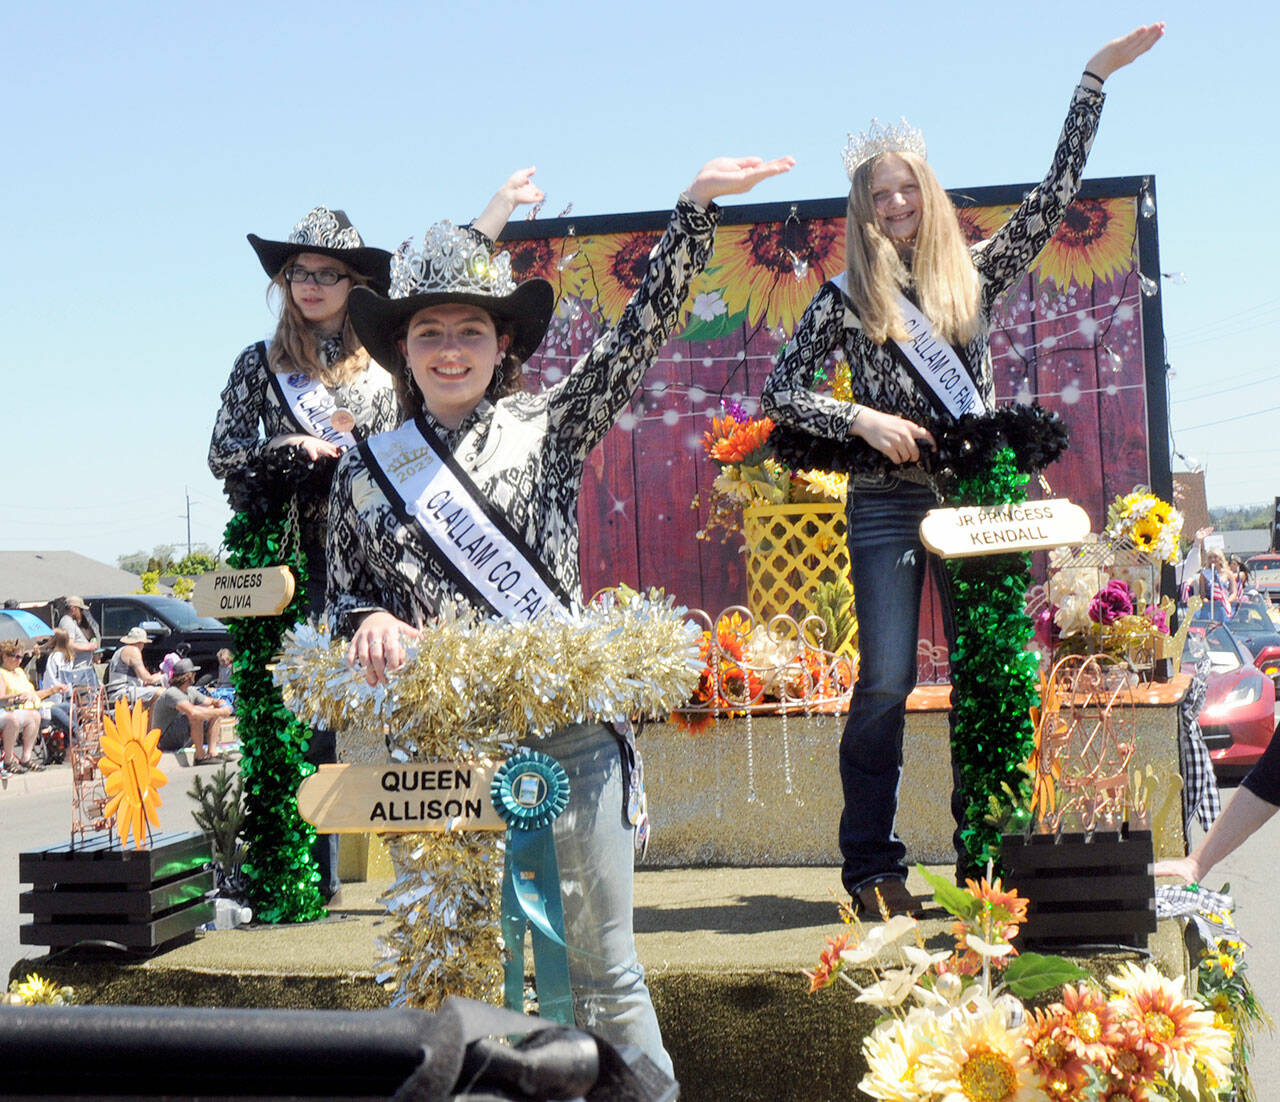 Clallam County Fair royalty, from left, Princess Olivia Ostlund, Queen Allison Pettit and Junior Princess Kendall Adolphe ride their festival float, which received the Irrigation Festival Chairmans Award. (Keith Thorpe/Peninsula Daily News)